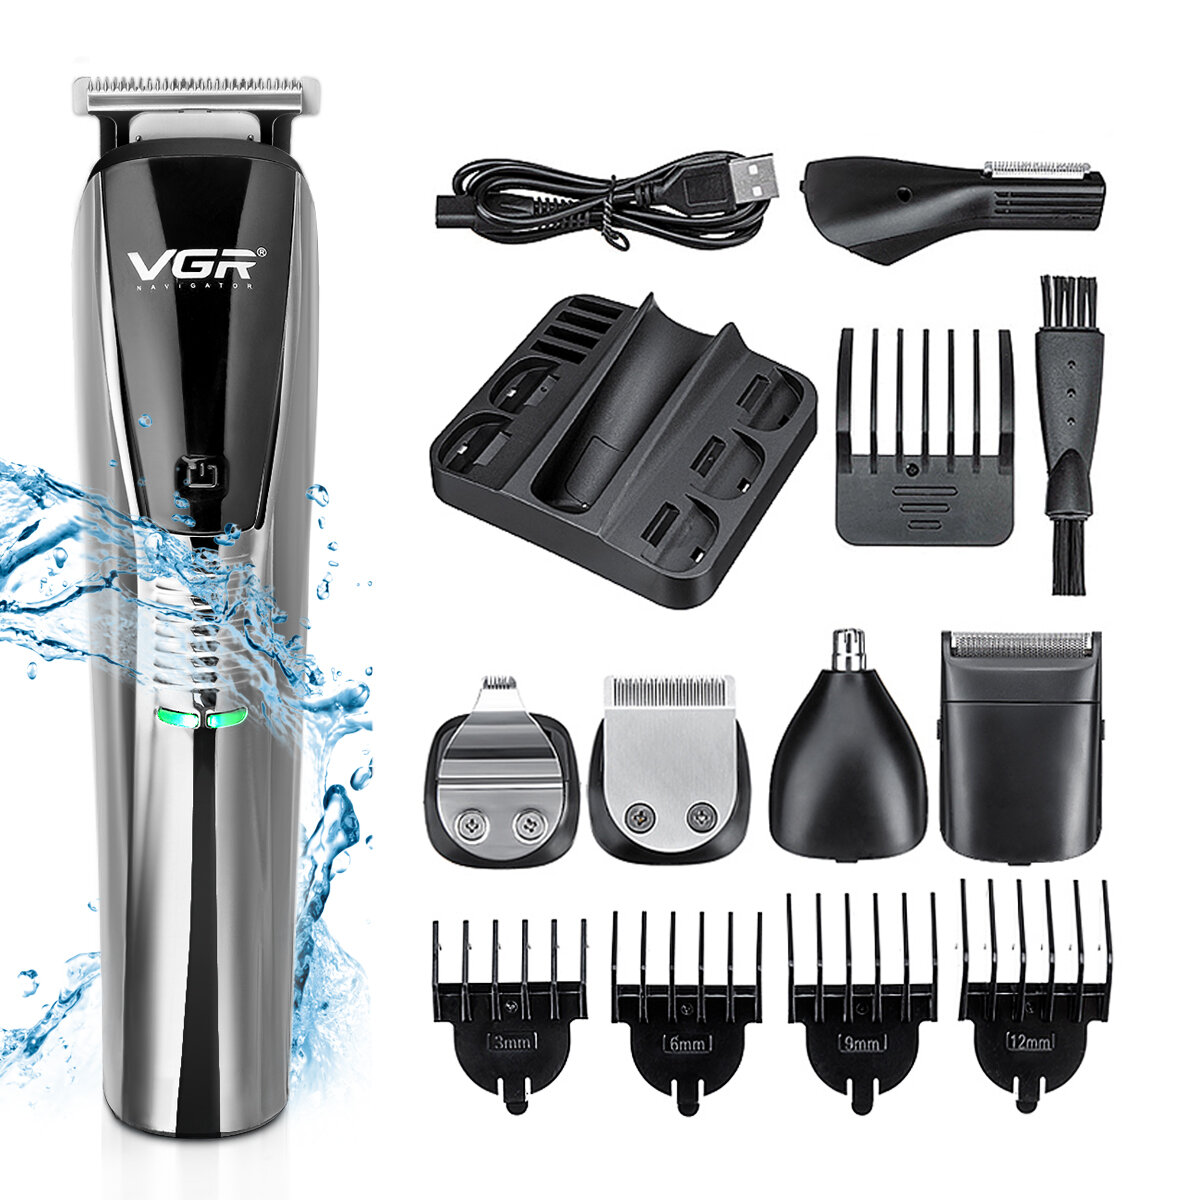 

VGR Multifunctional Hair Clipper USB Charging Men's Suit Electric Clippers Razor Trimmer